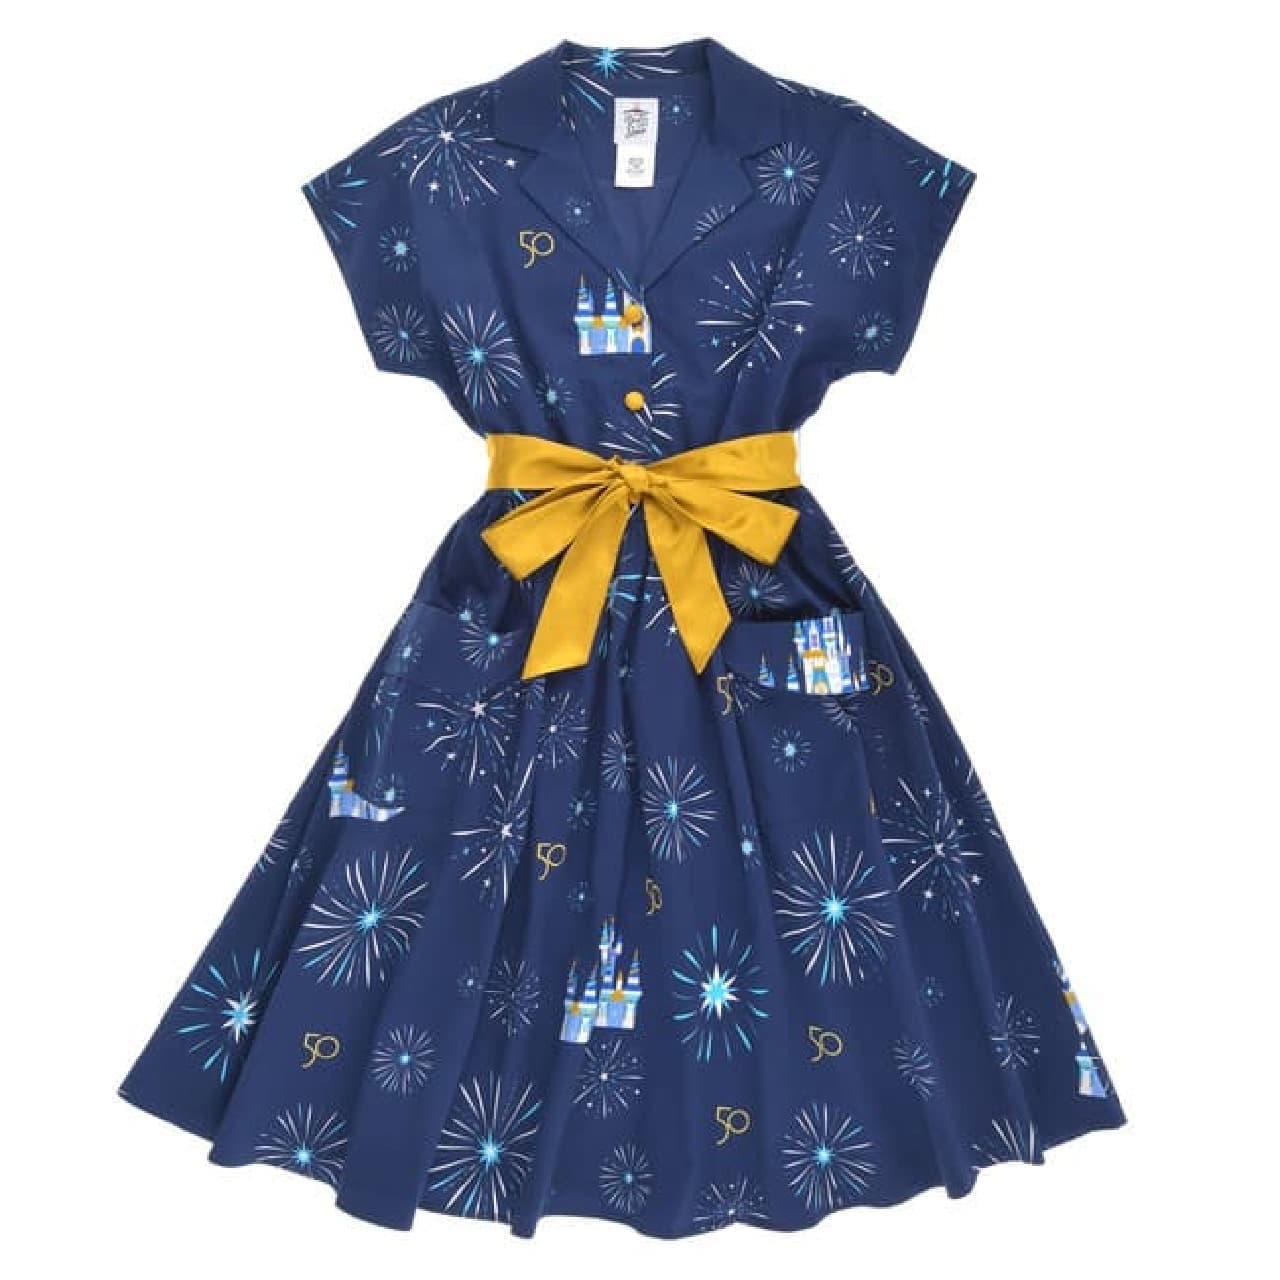 Walt Disney World Resort 50th Anniversary New Collection -- Gorgeous Music Box, One-Piece Dress, and Backpack